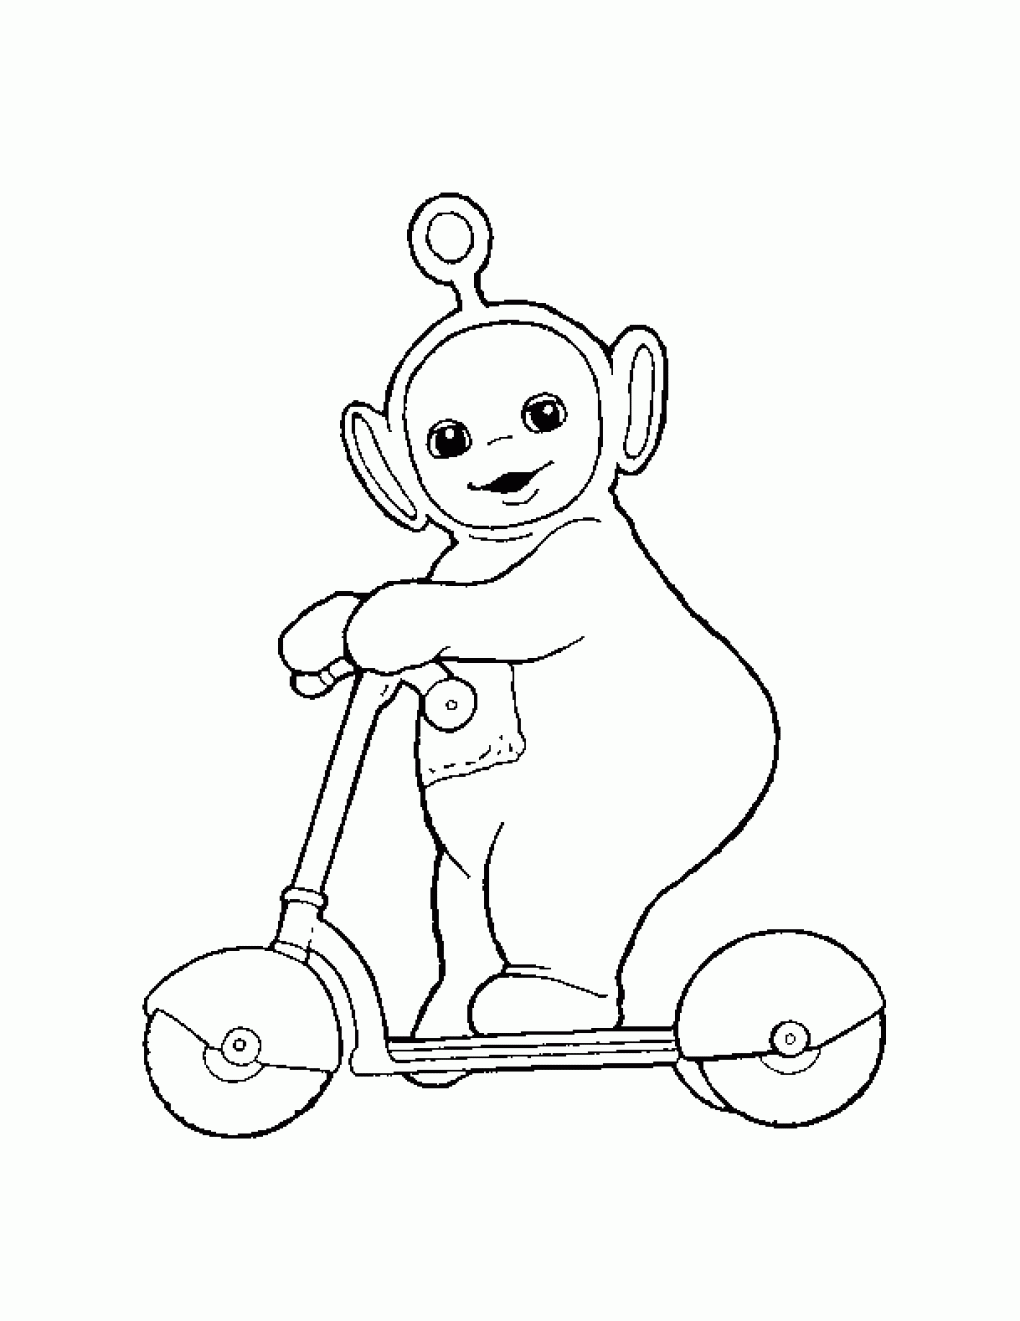 teletubbies colouring pages free printable teletubbies coloring pages for kids colouring teletubbies pages 1 1